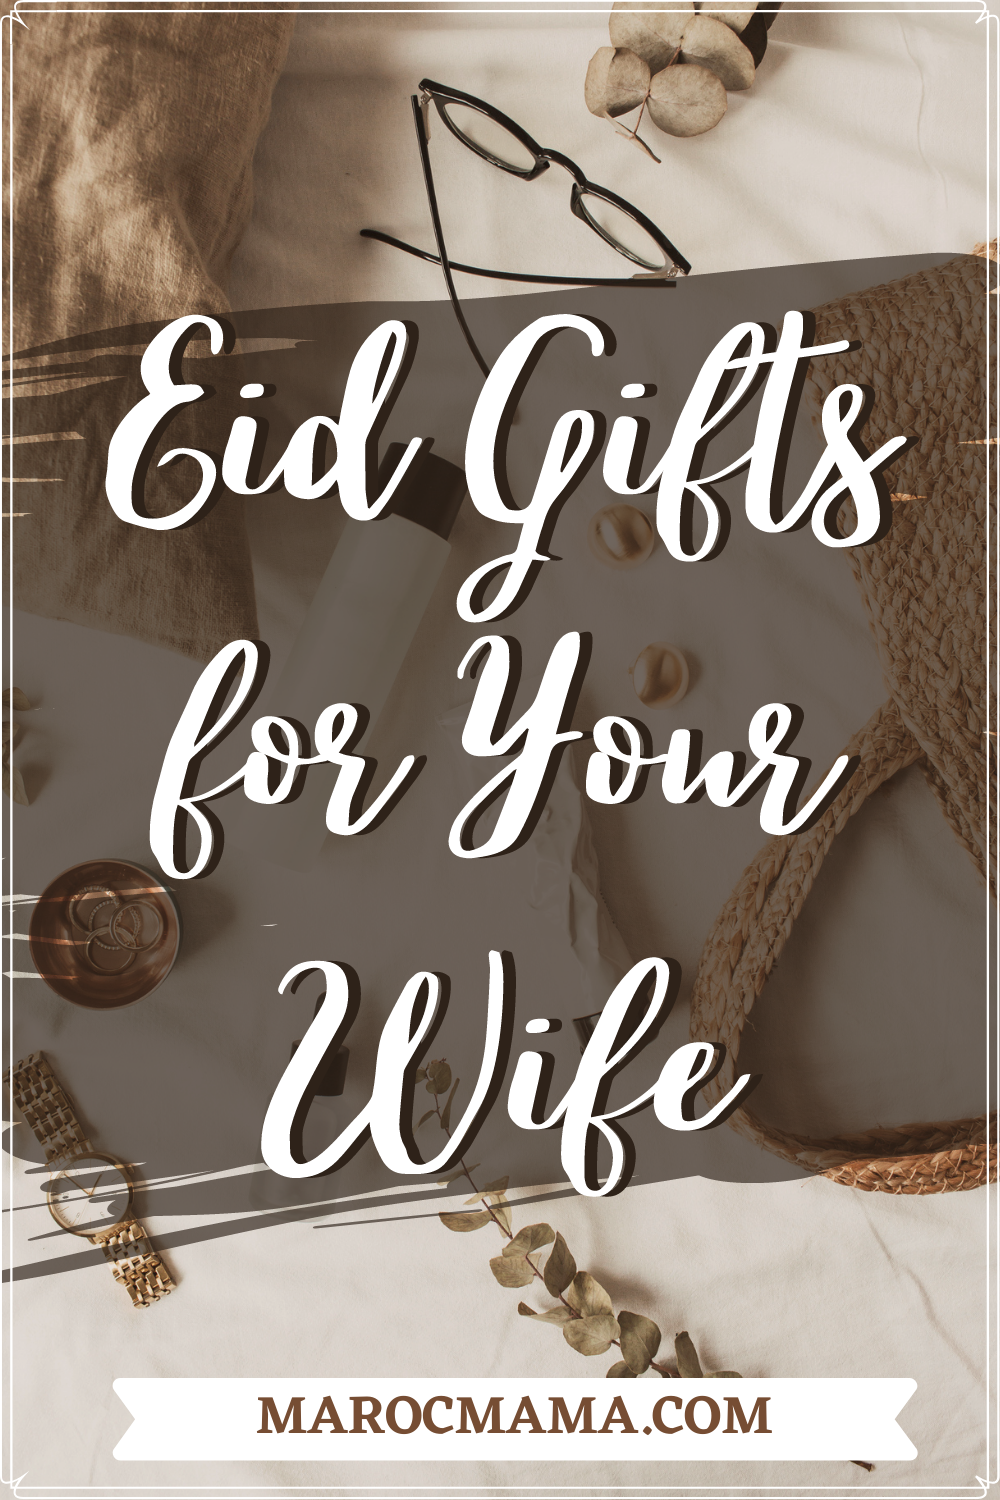 Discover perfect gifts for a Joyful Eid Celebration - Gaggler